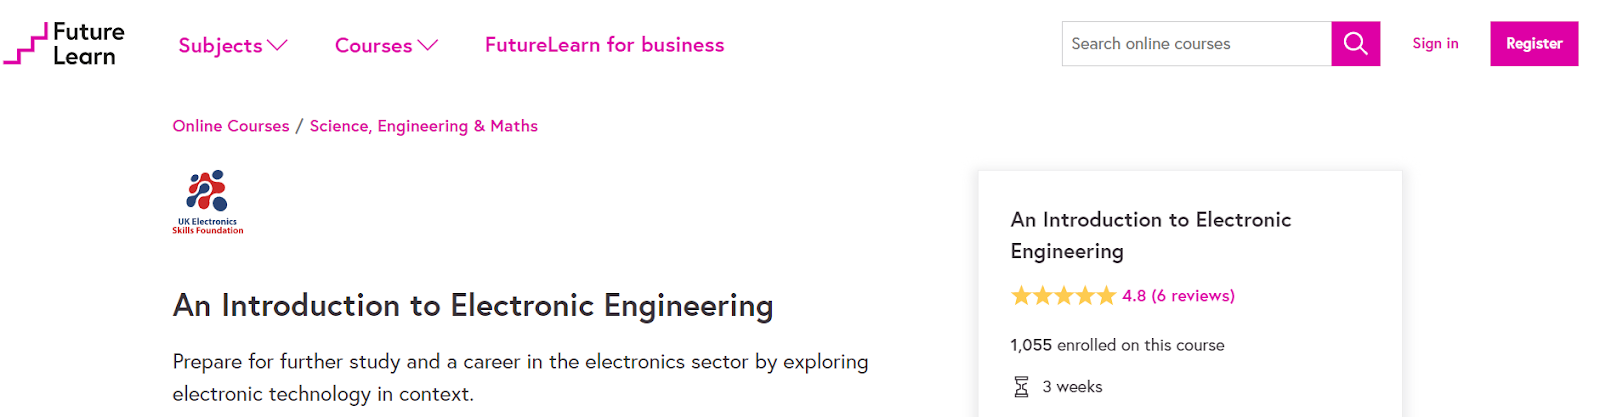 electrical circuits, electrical engineers develop, computer engineering